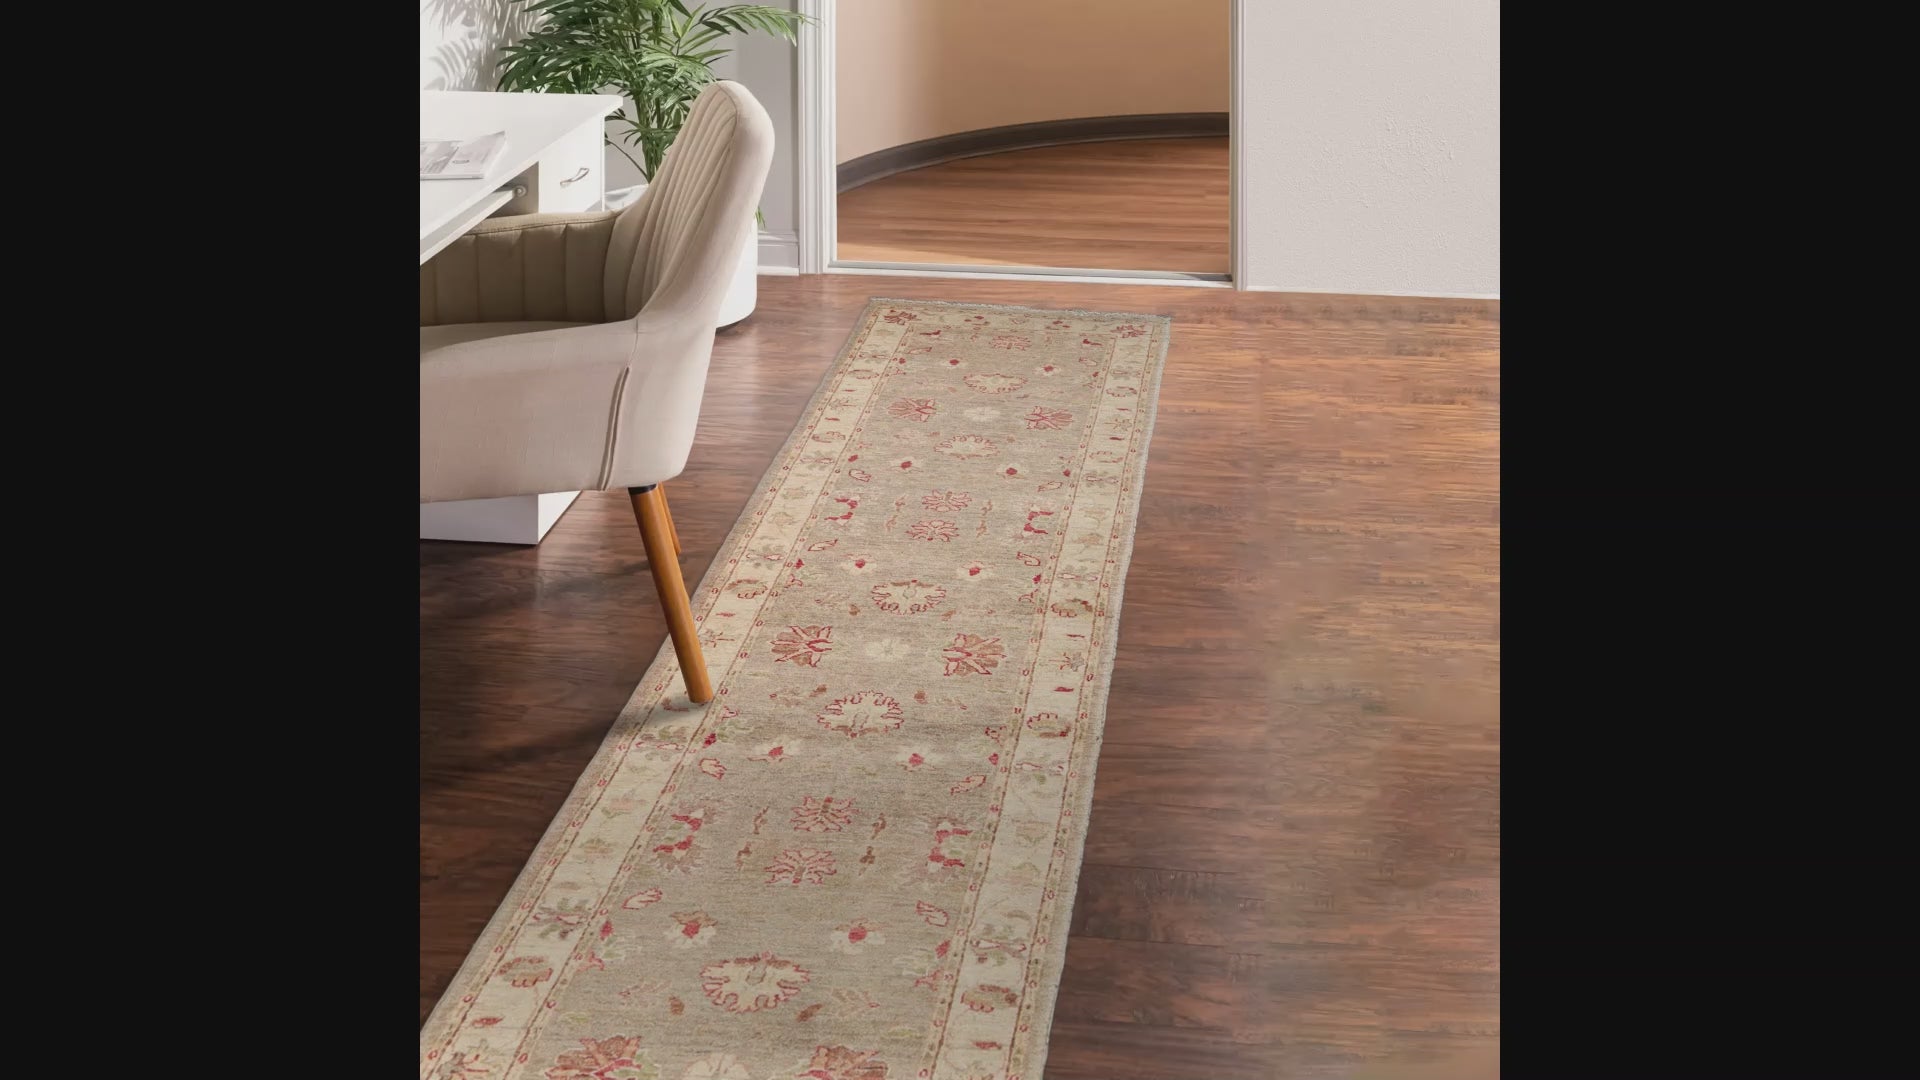 Samarkand Runner Hand Knotted 100% Wool Chobi Peshawar Traditional Oriental Area Rug toupe, Beige Color